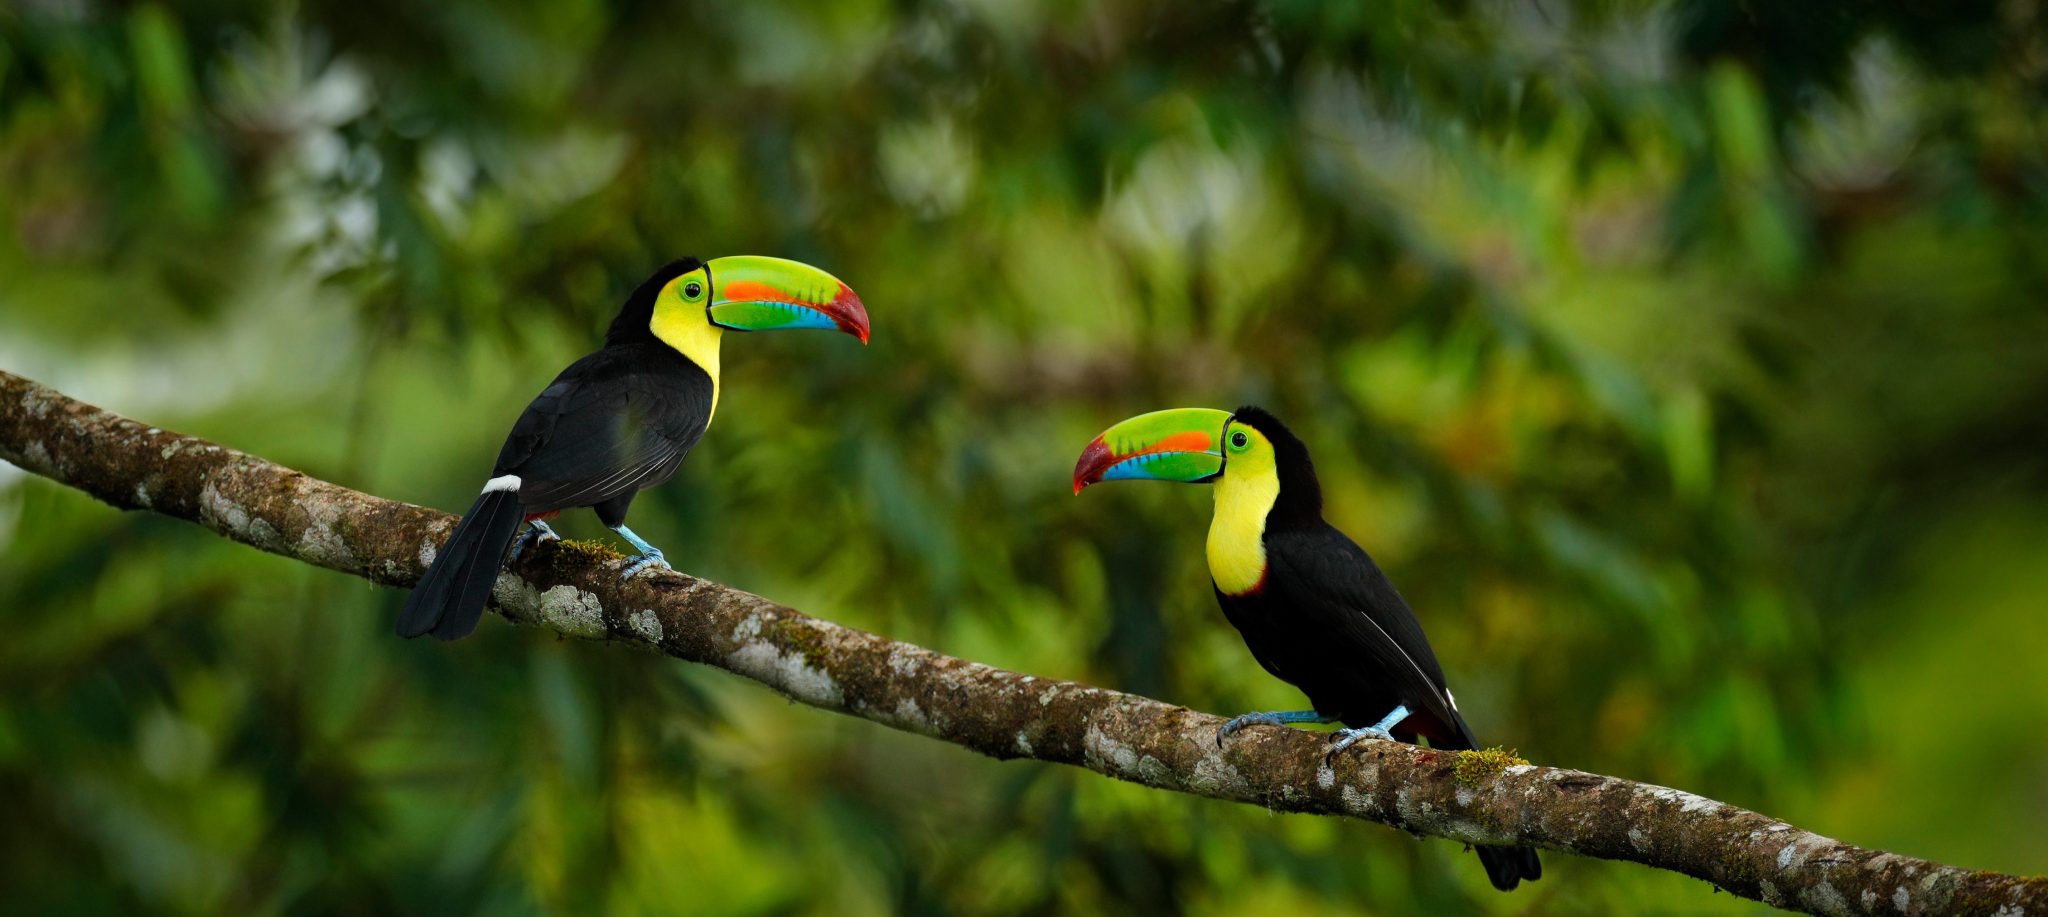 Top 8 Animals to Spot in Costa Rica